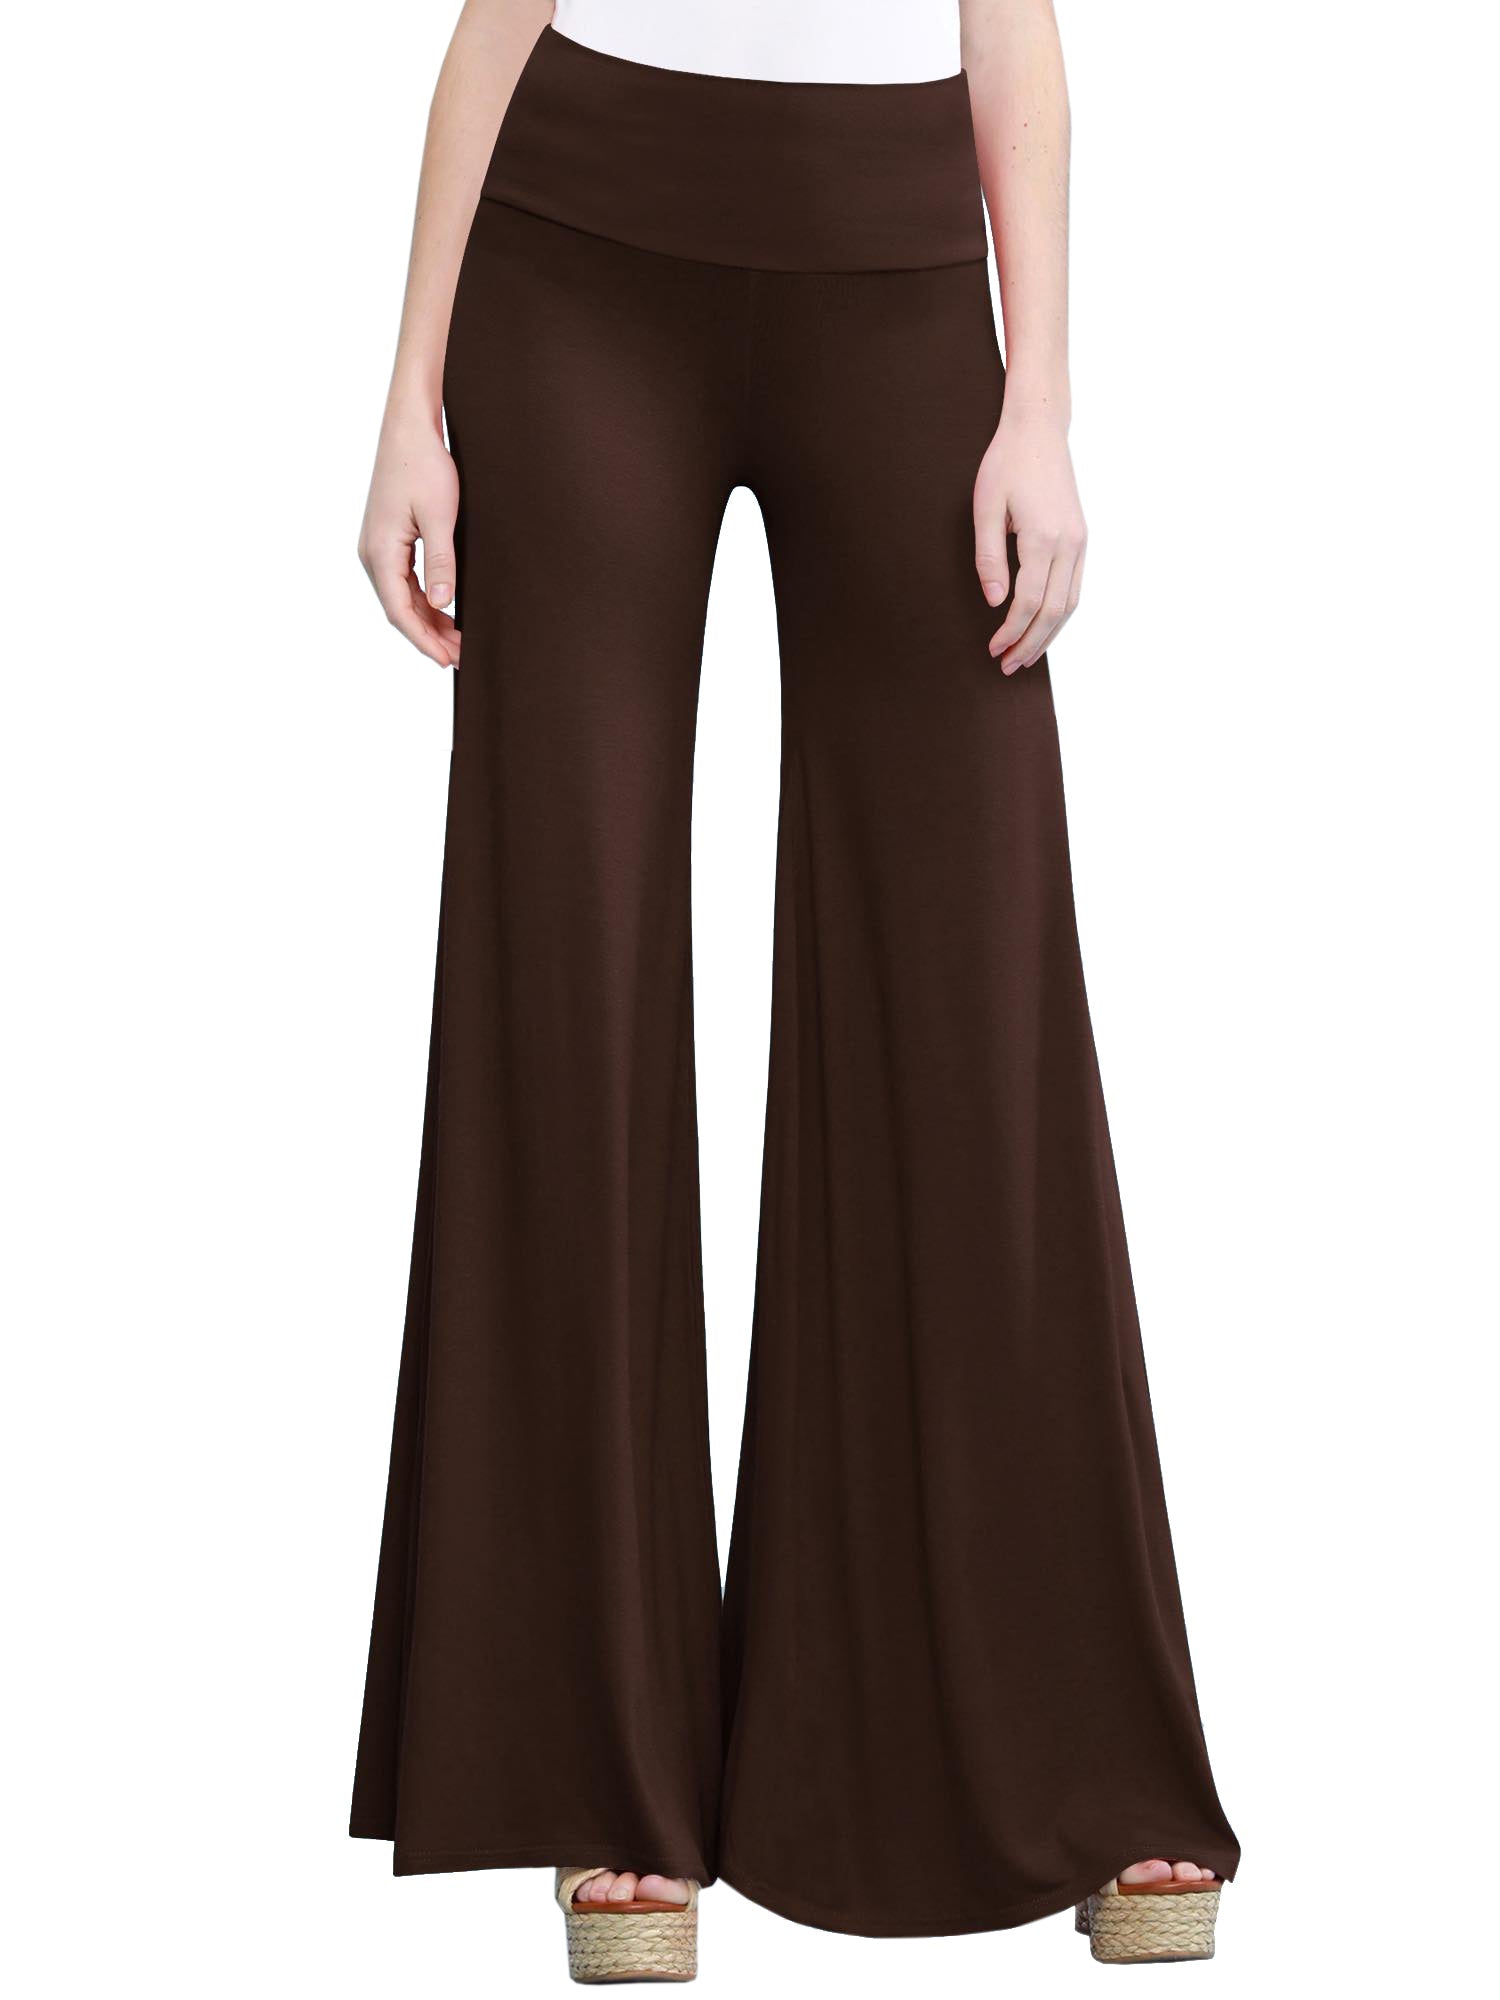 Buy DONSON PRESENT Casual Palazzo Pants for Women Lounge Pants